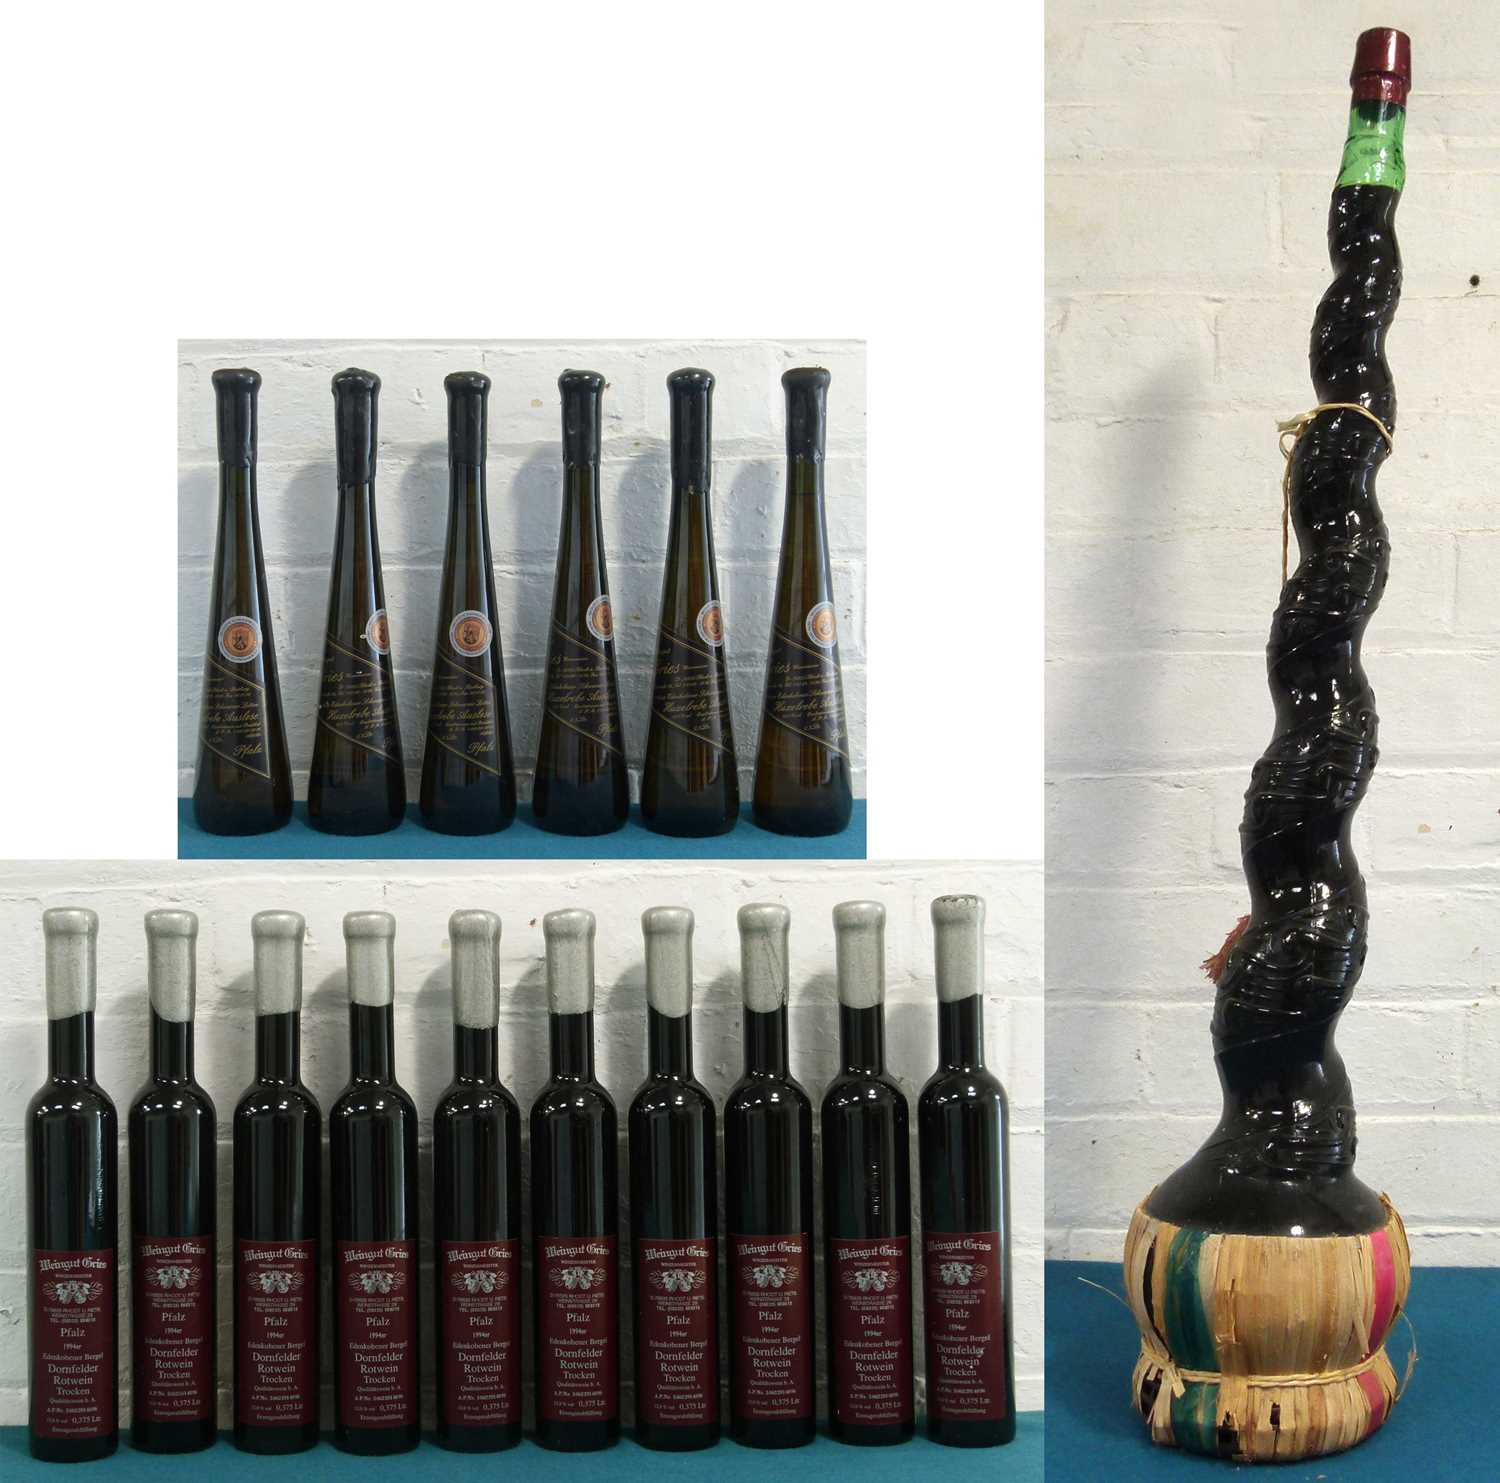 Lot 12 - 17 Half Litre, Half and 3 Litre Bottles Mixed Lot Fine Estate German and Italian Wines